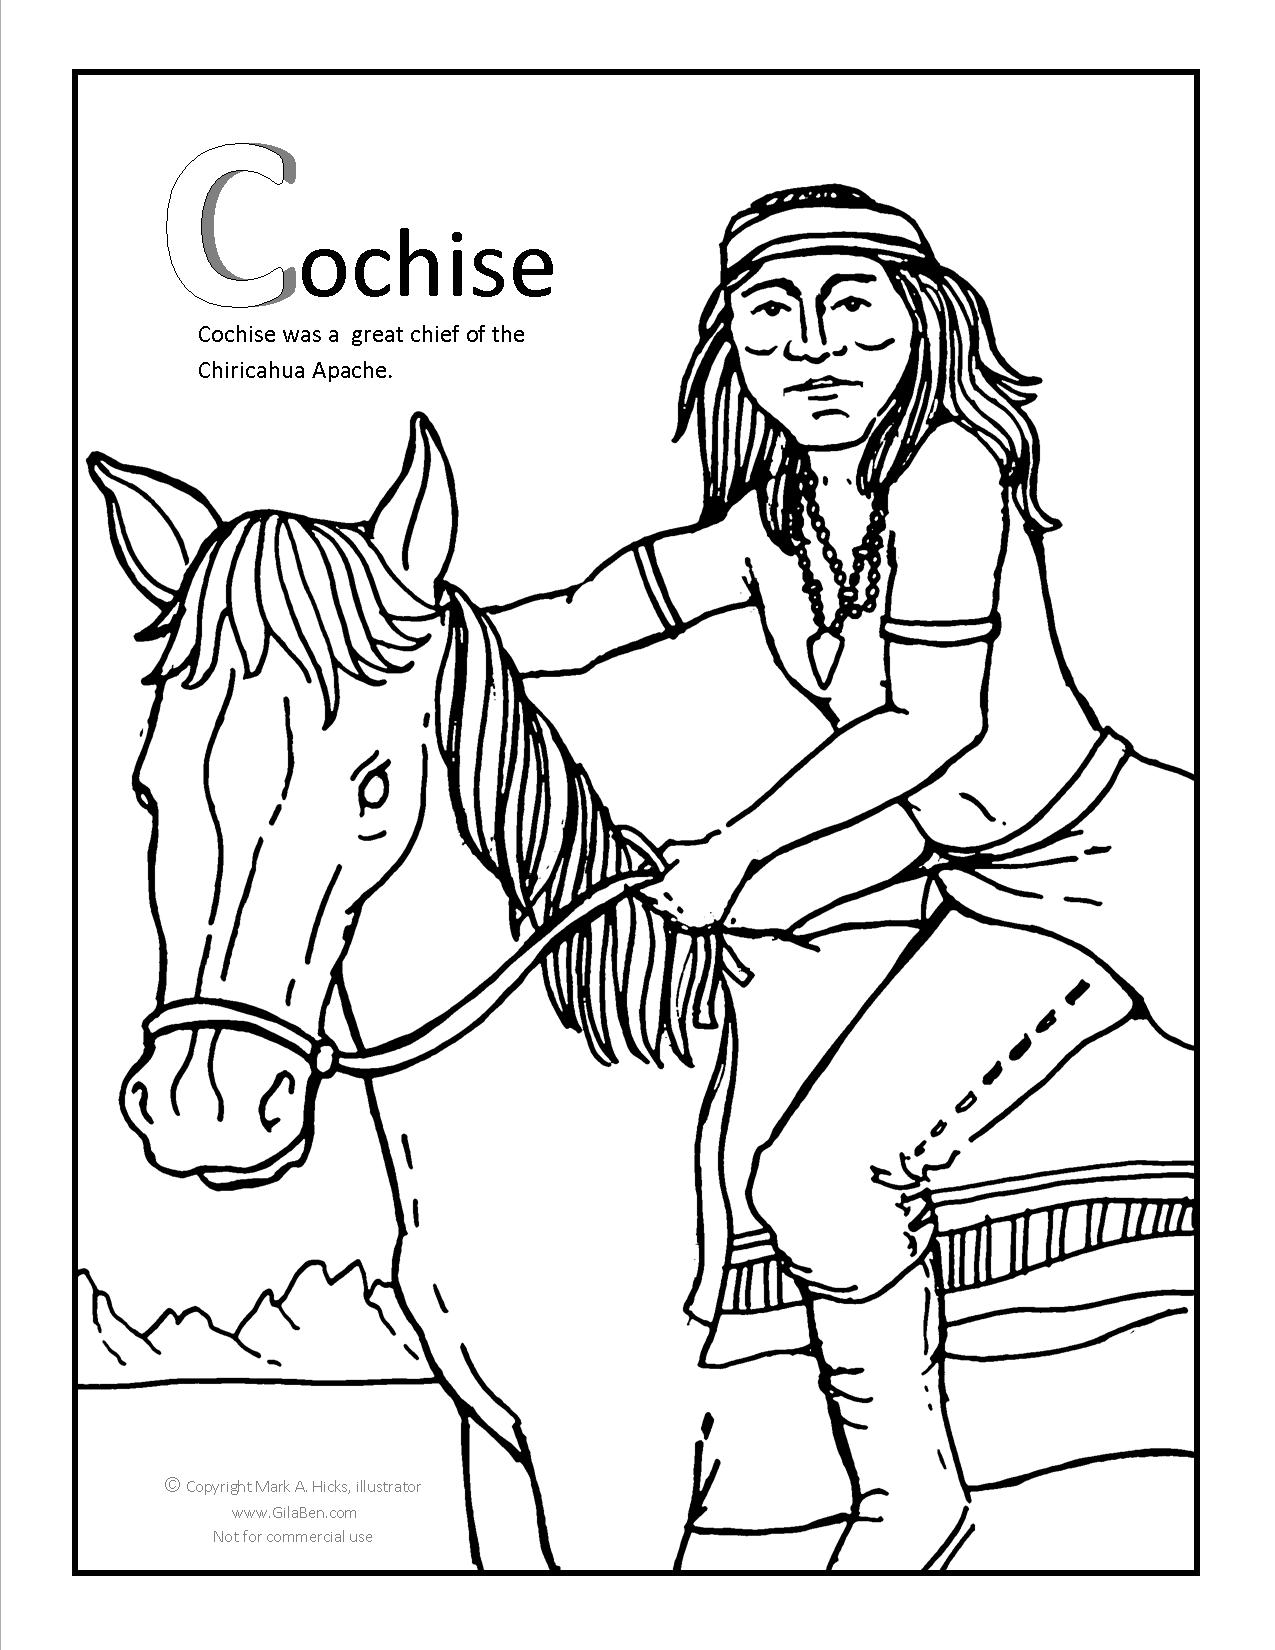 Cochise Coloring page